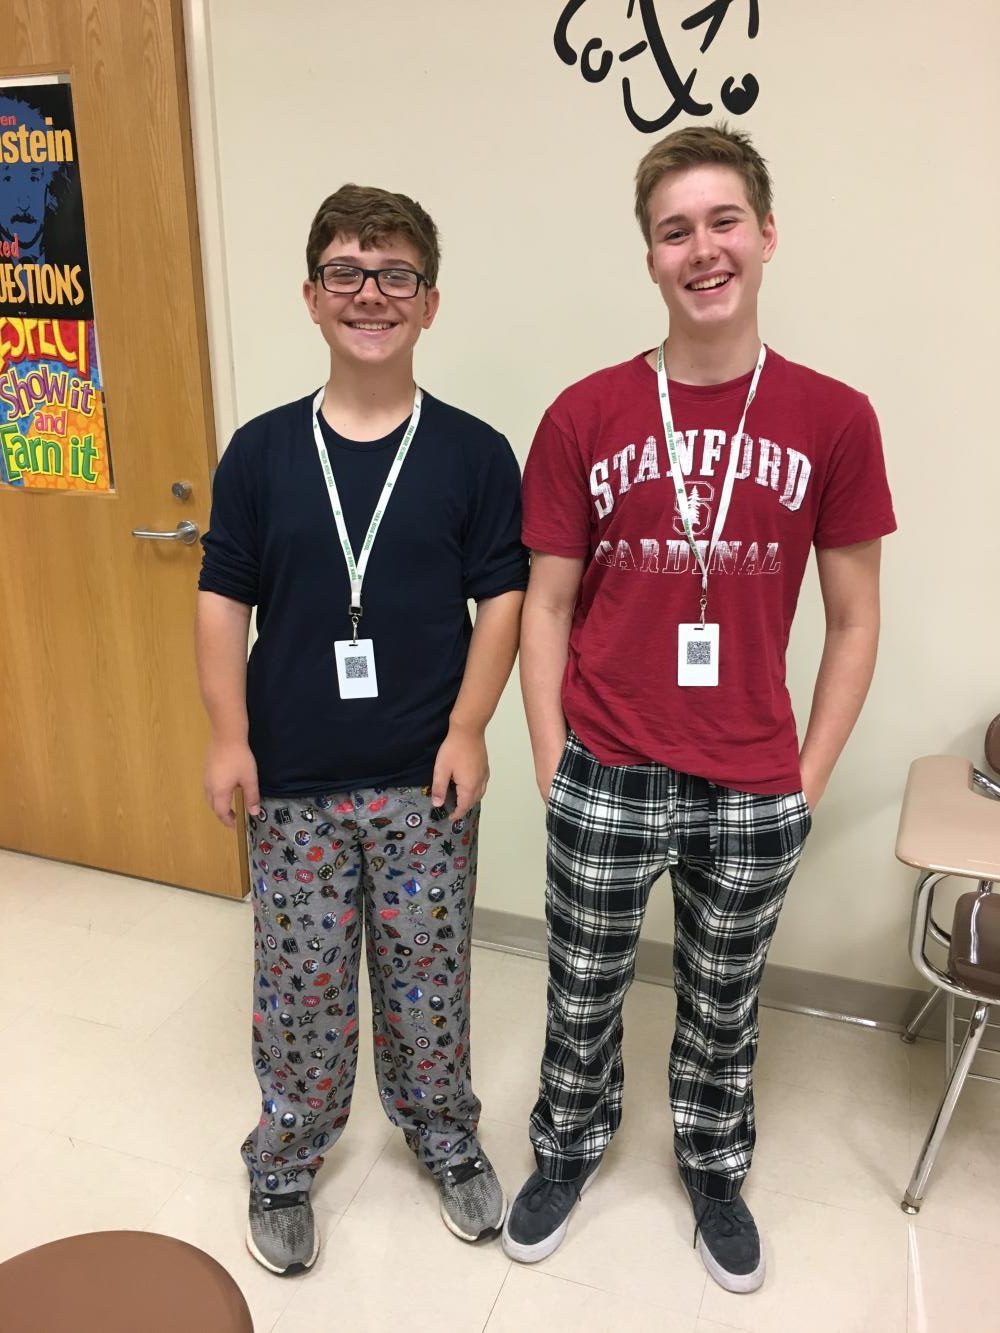 Why do Americans wear pajama pants to school or to stores? - Quora